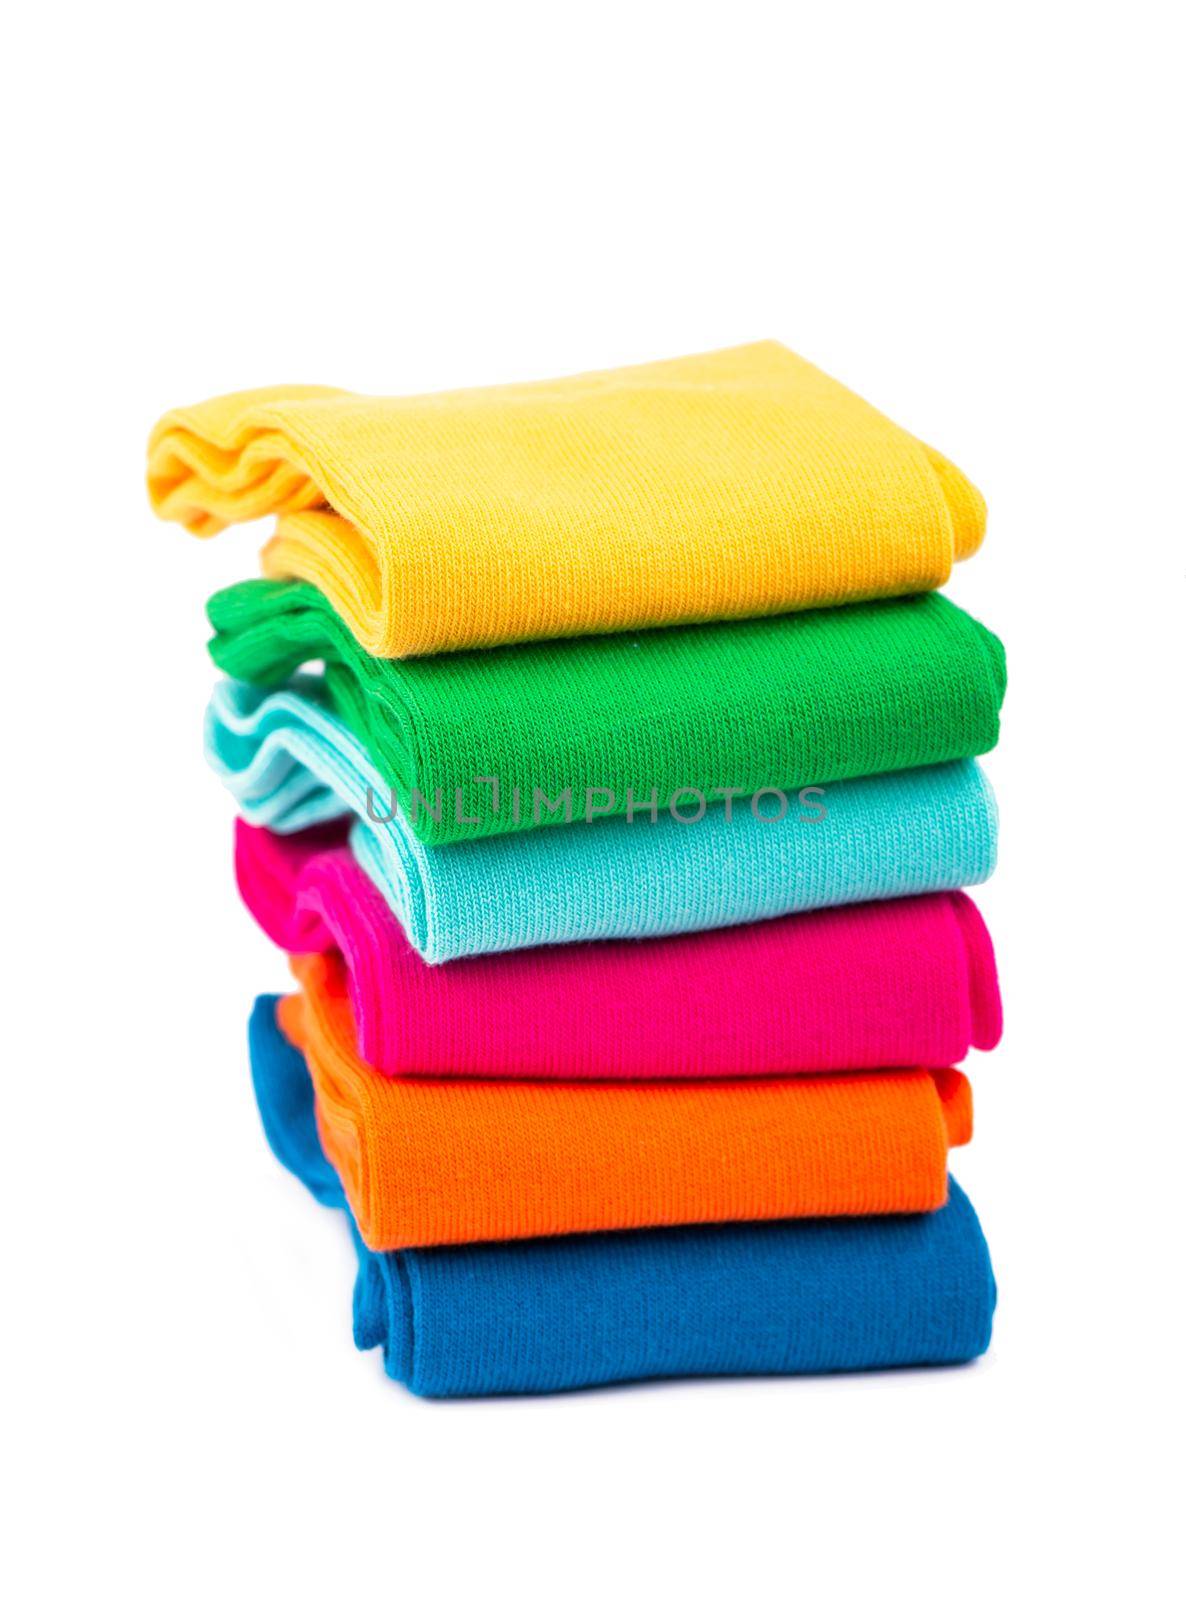 Pile of colorful socks on white background by aprilphoto